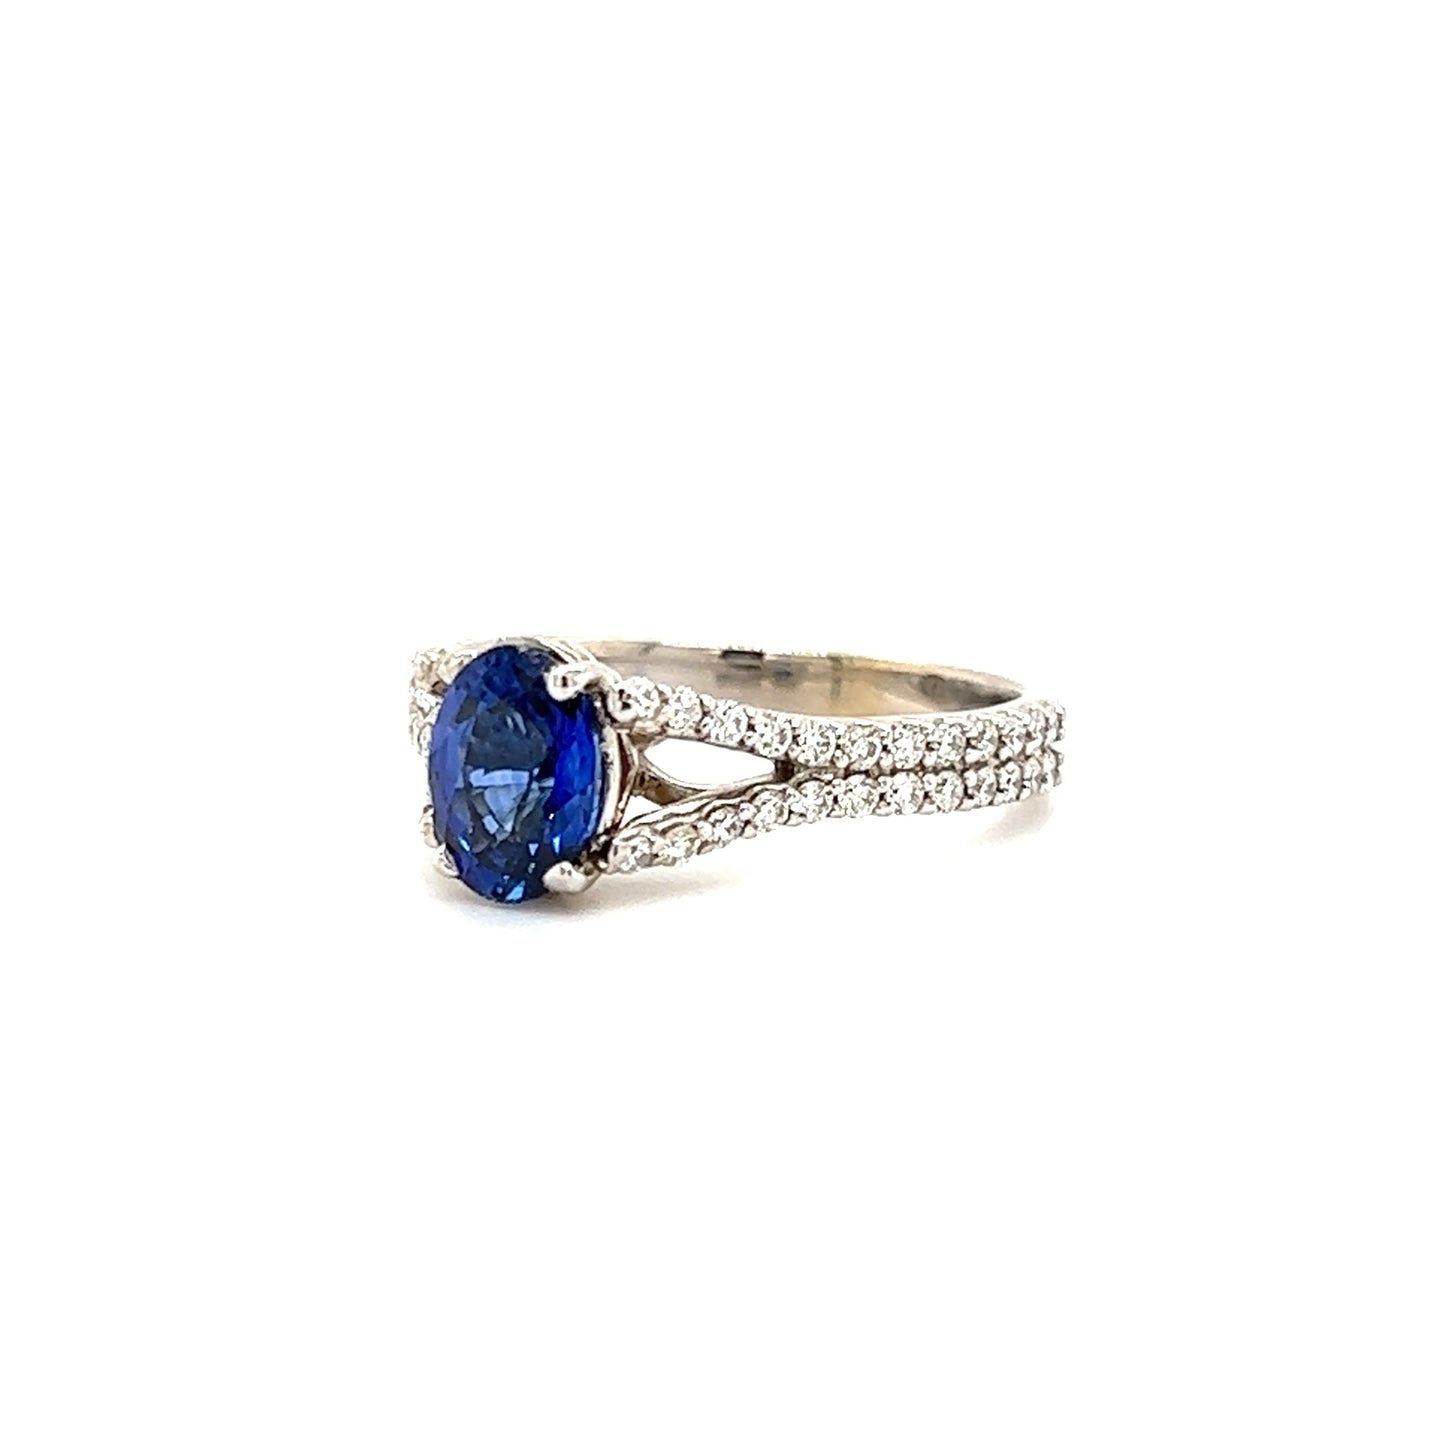 Oval Blue Sapphire Ring with Split Diamond Shank in 14K White Gold Left Side View